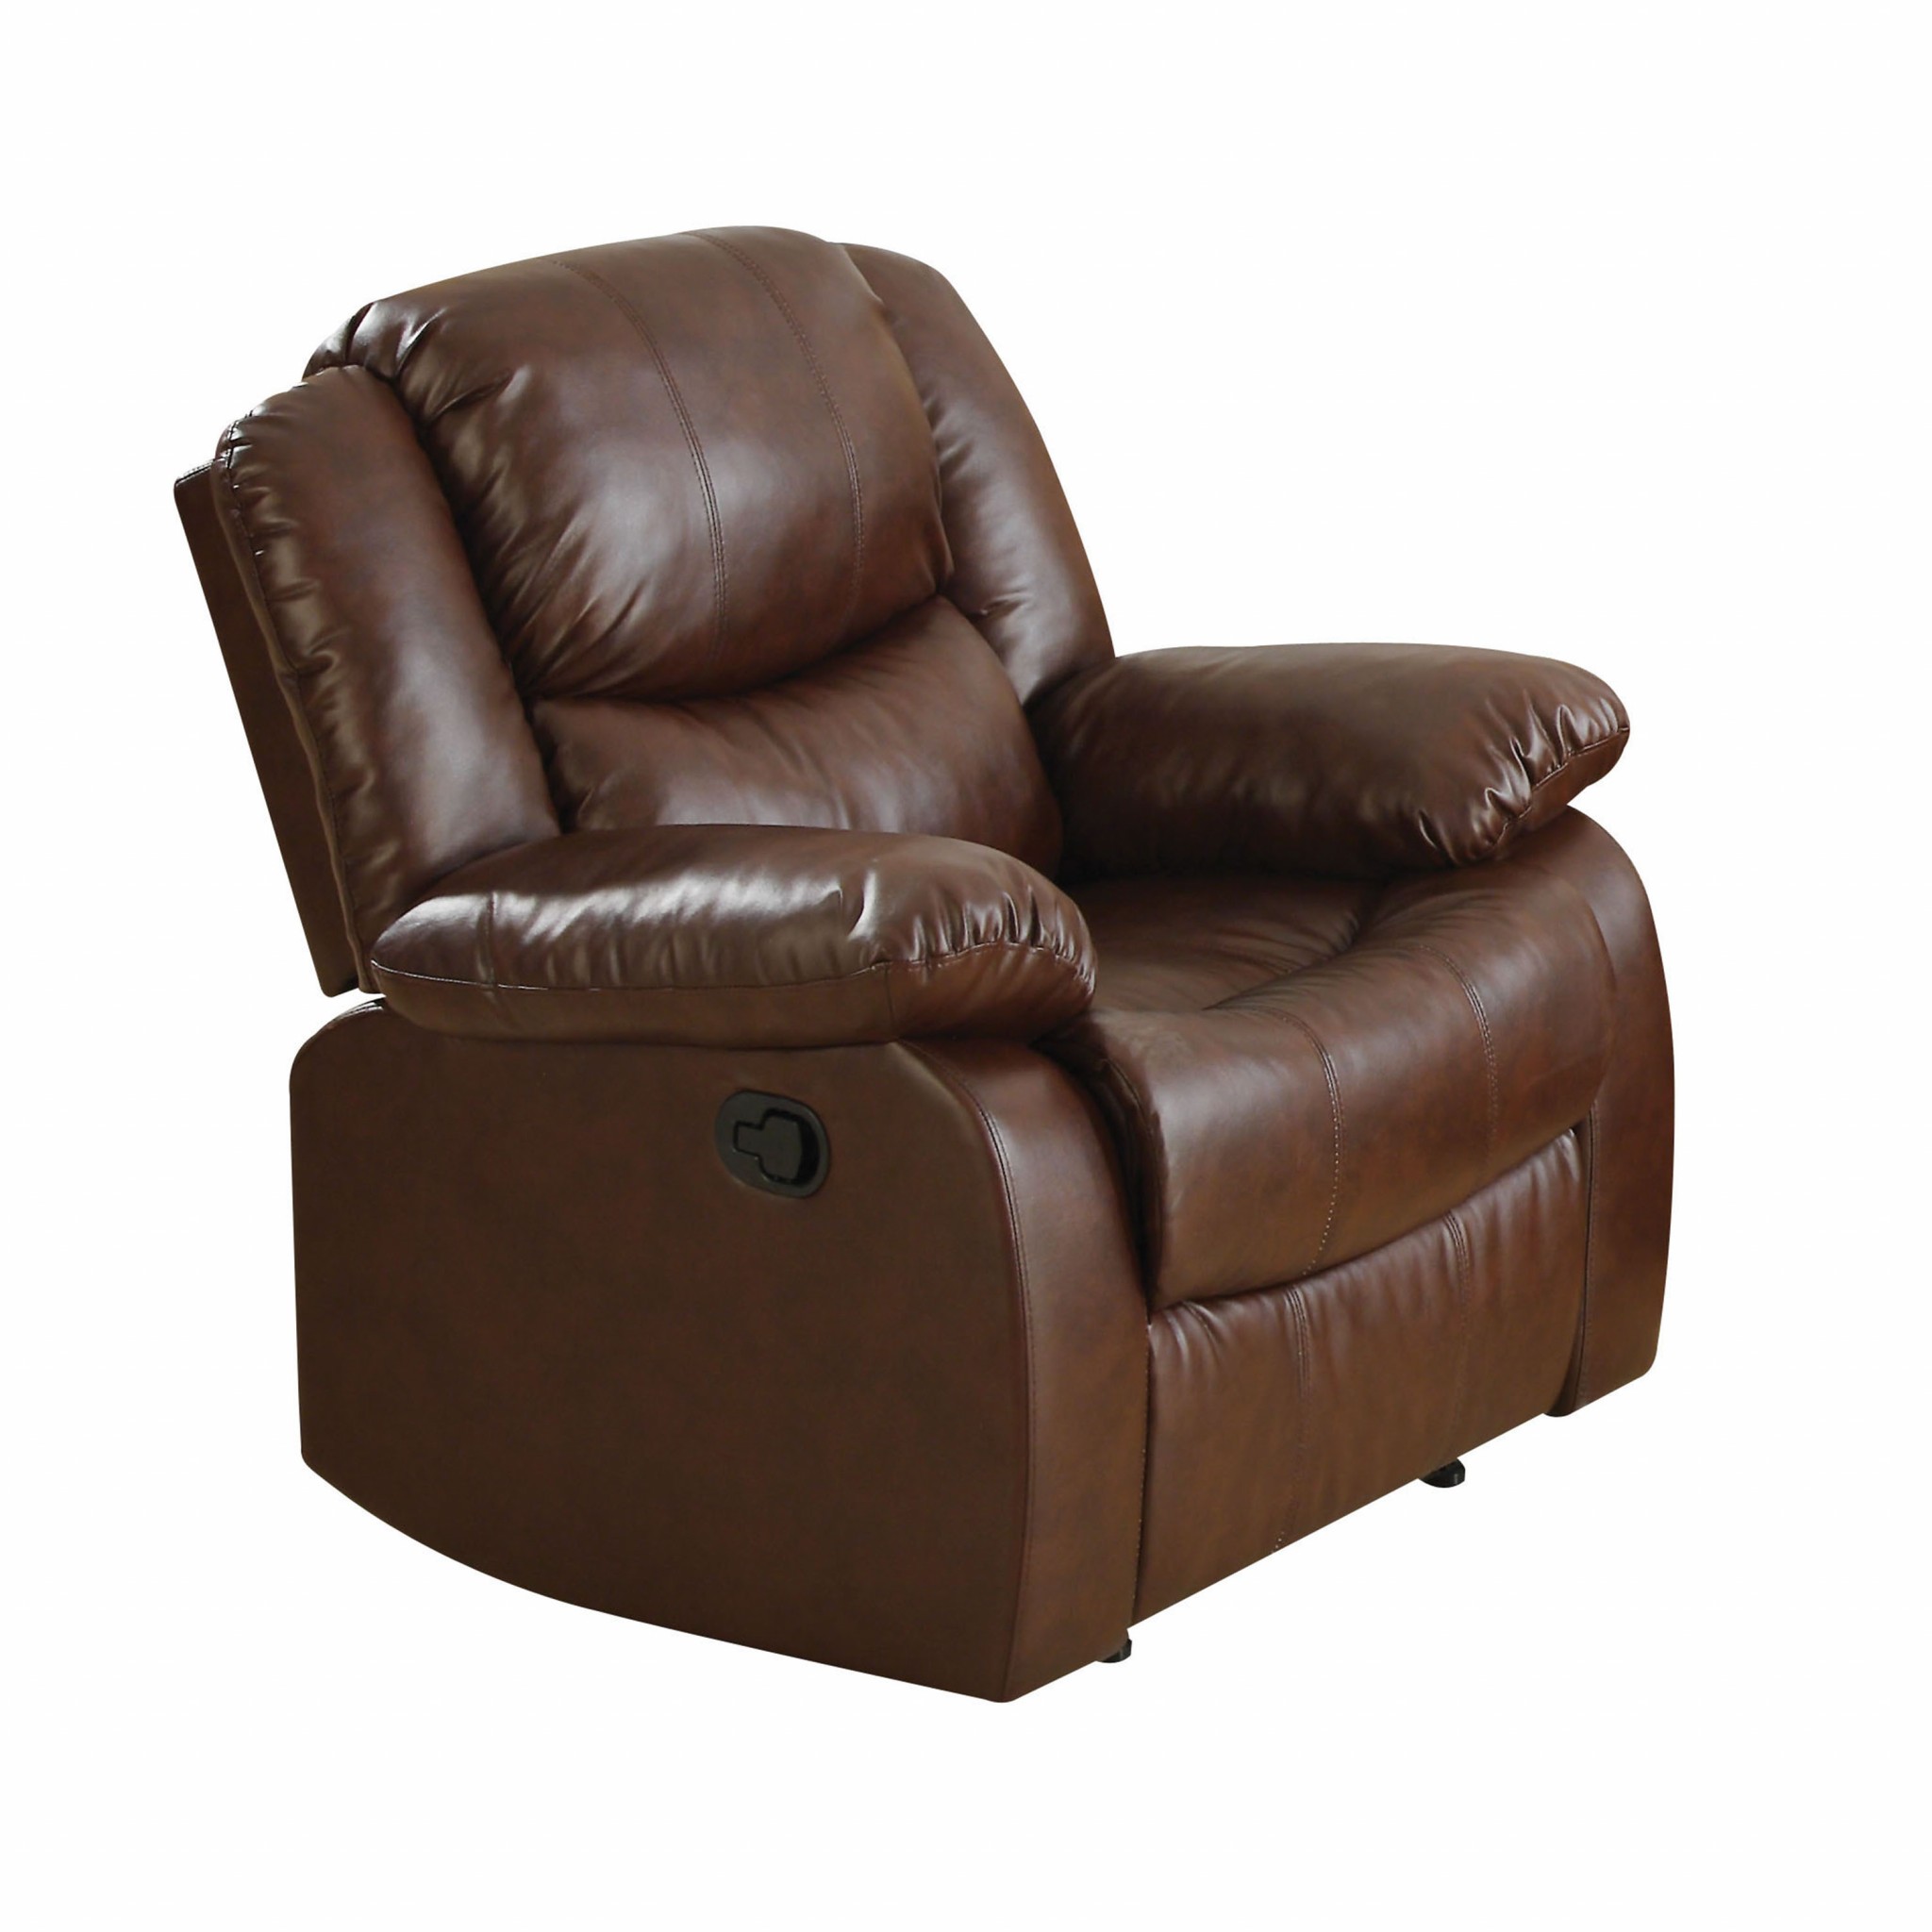 39" X 37" X 38" Brown Bonded Leather Recliner